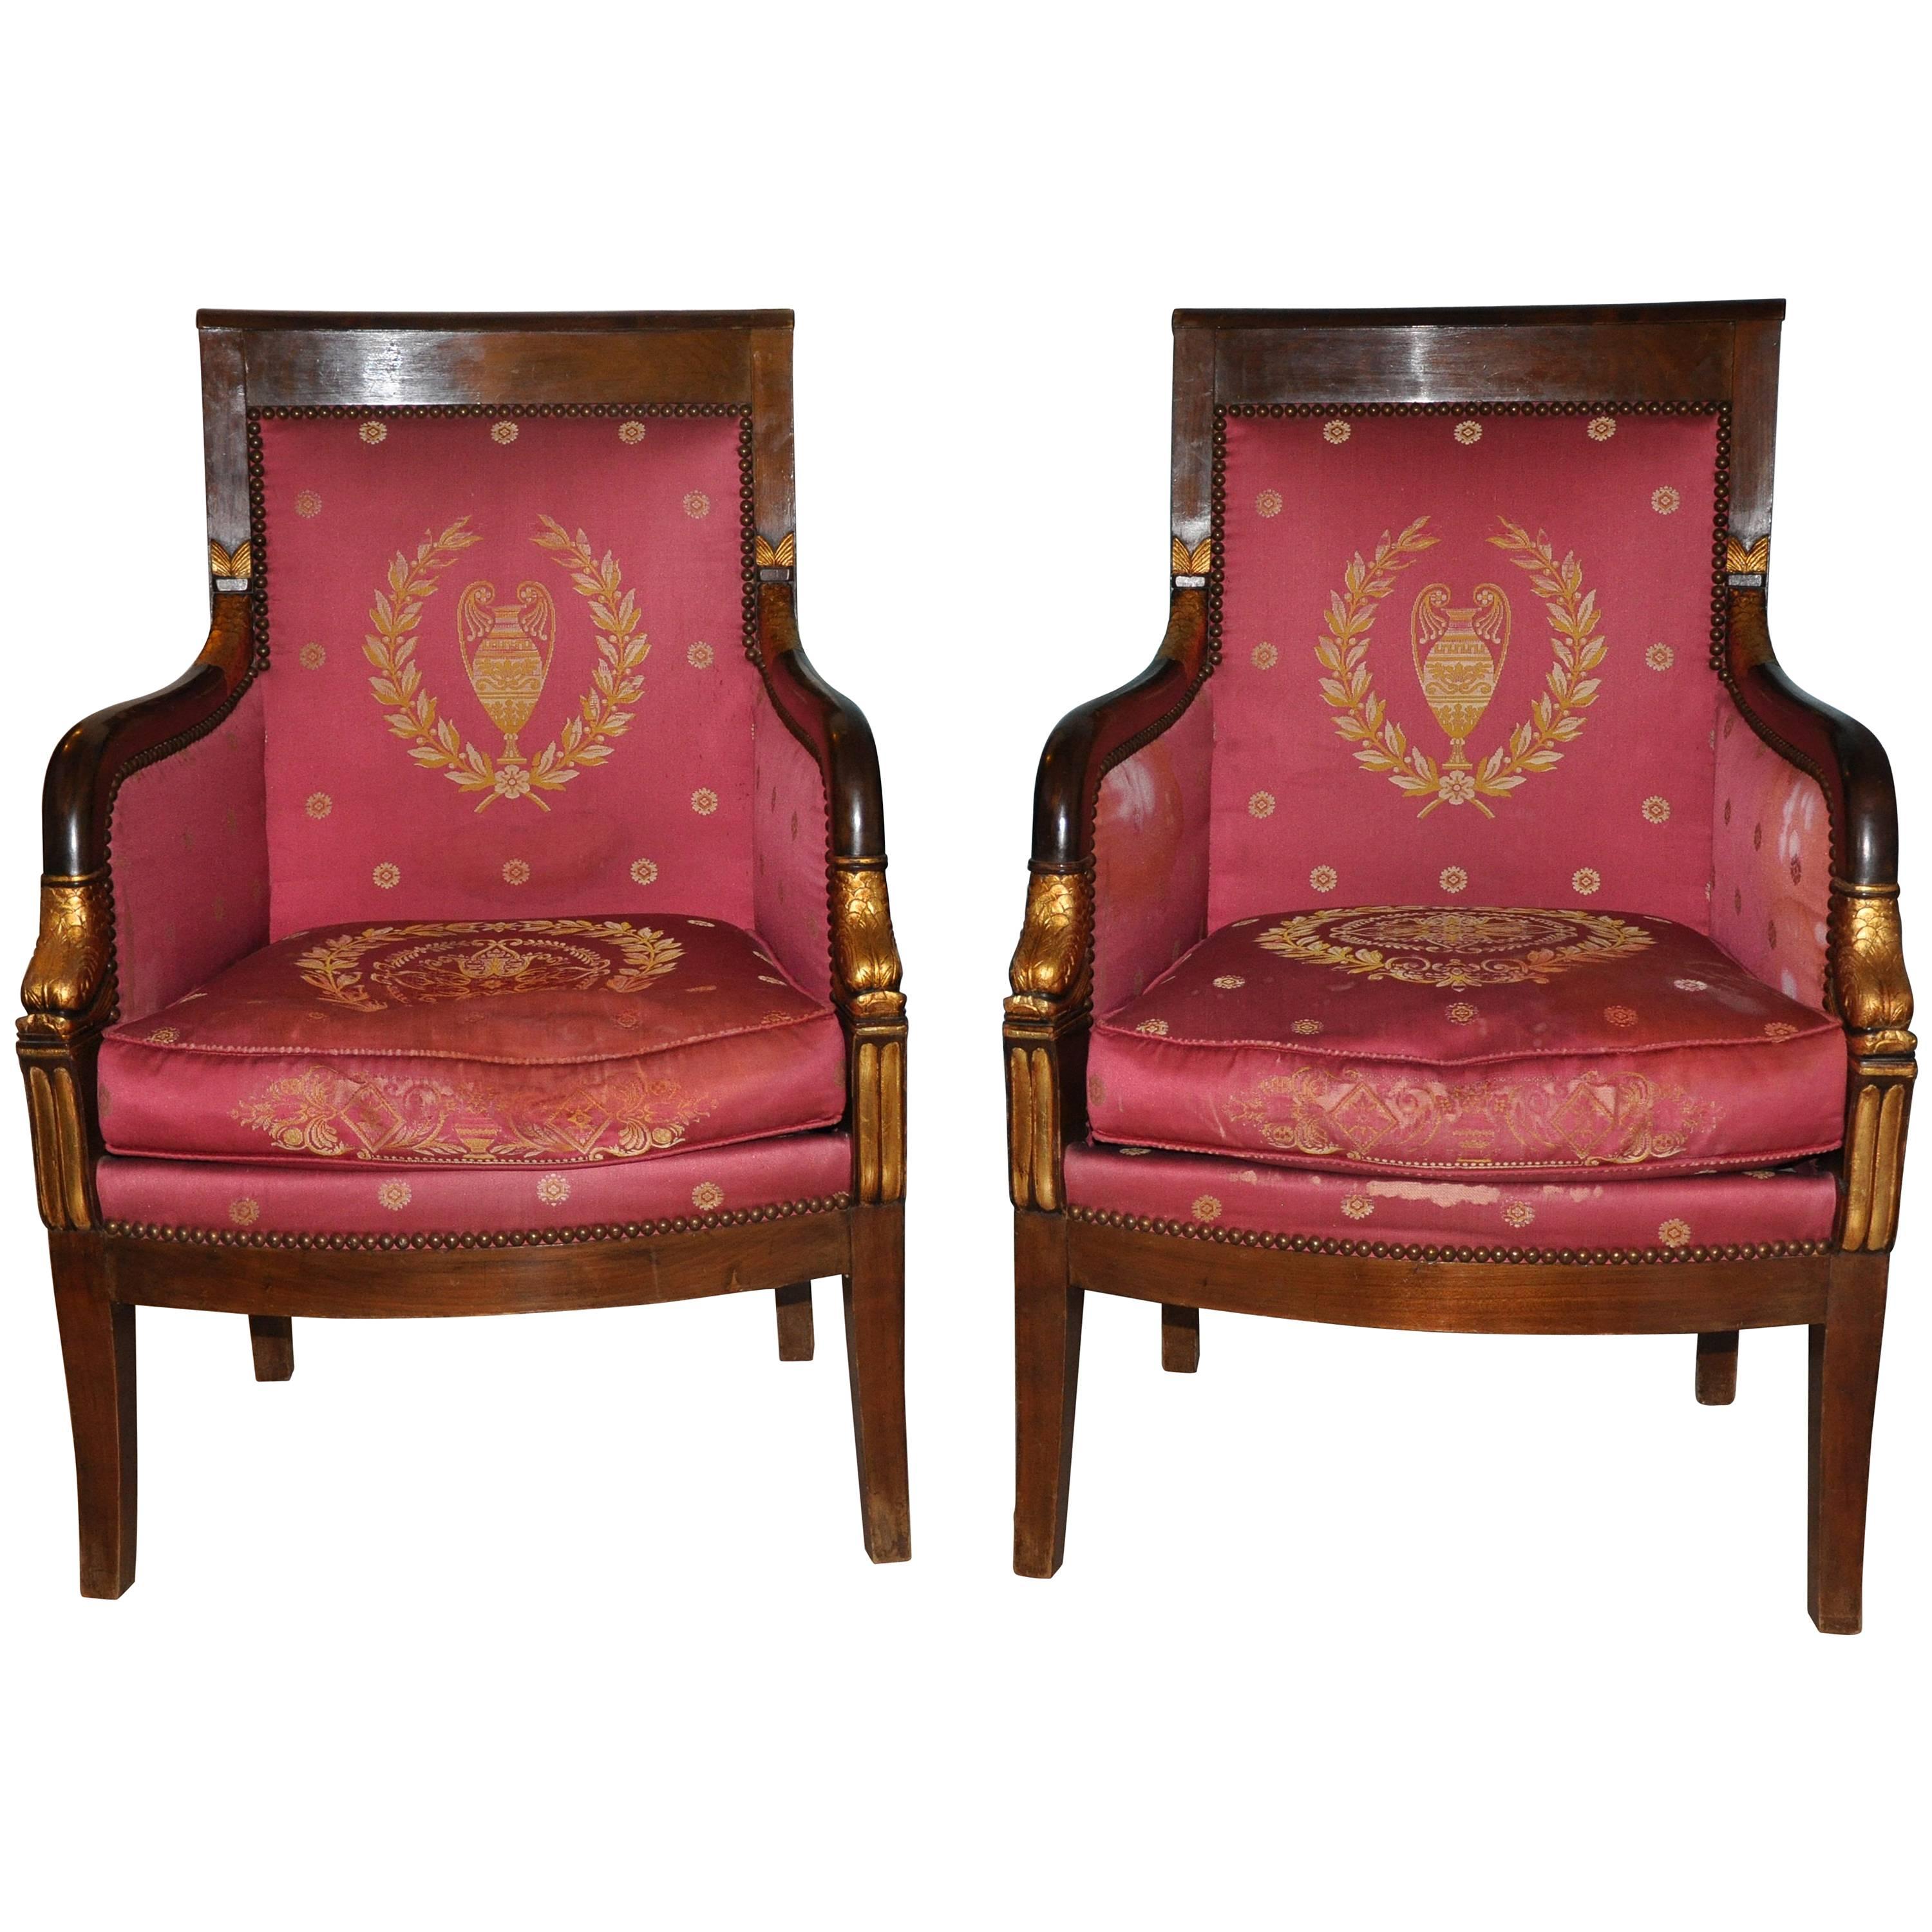 19th Century Rare Pair of Italian Empire Armchairs with Gold Leaf Decorations For Sale